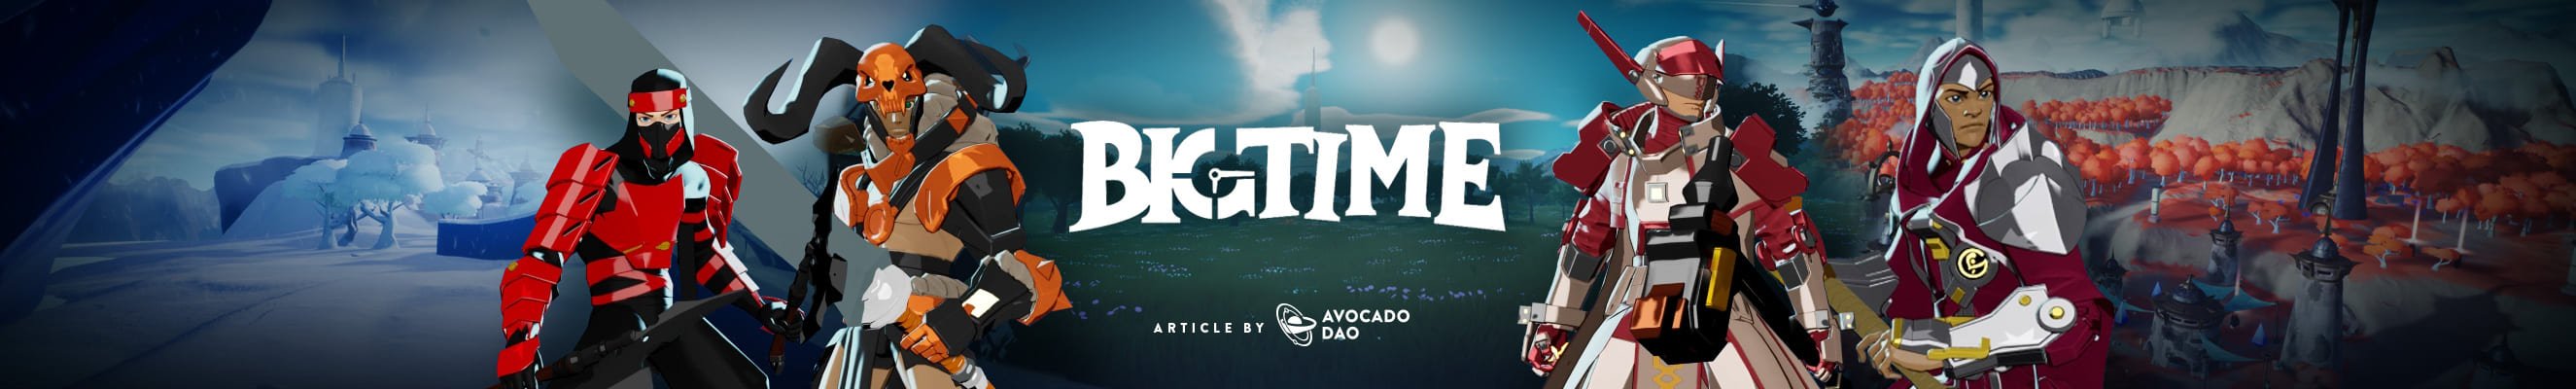 Big Time - How to Find Your Name on the Big Time Leaderboard - Avocado DAO